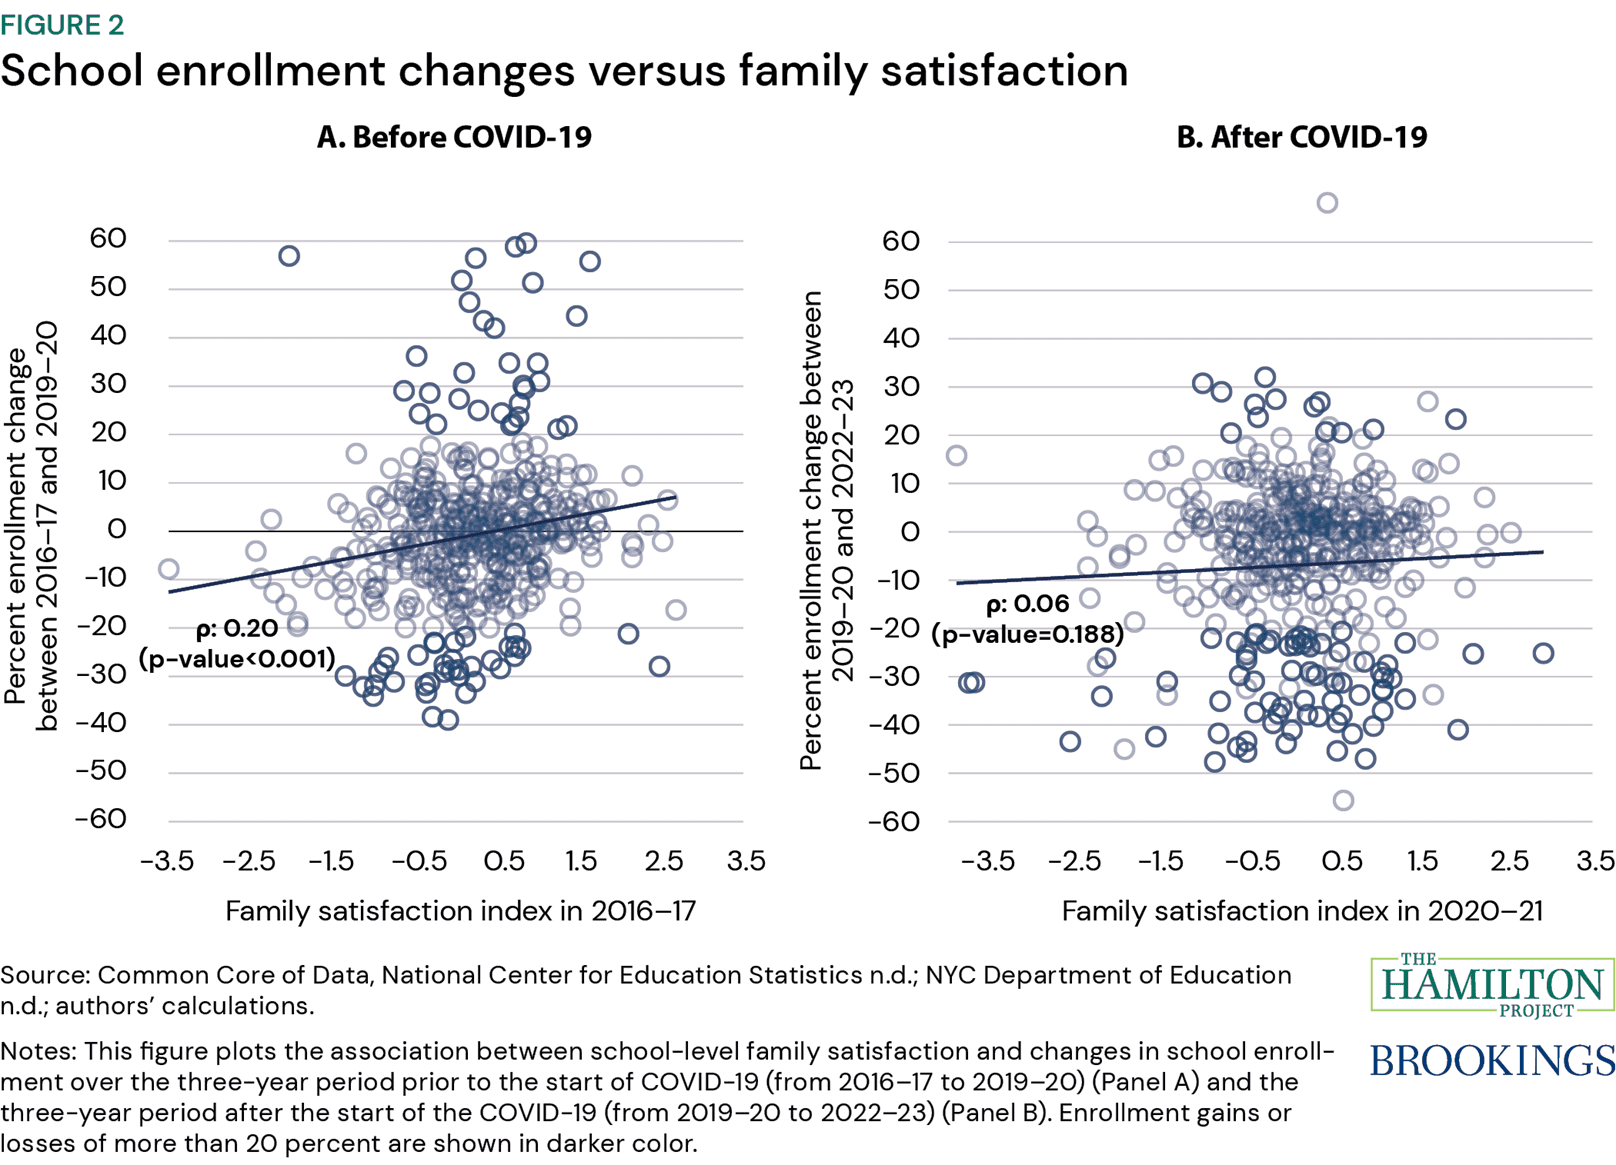 Figure 2: School enrollment changes versus family satisfaction, before and after COVID-19